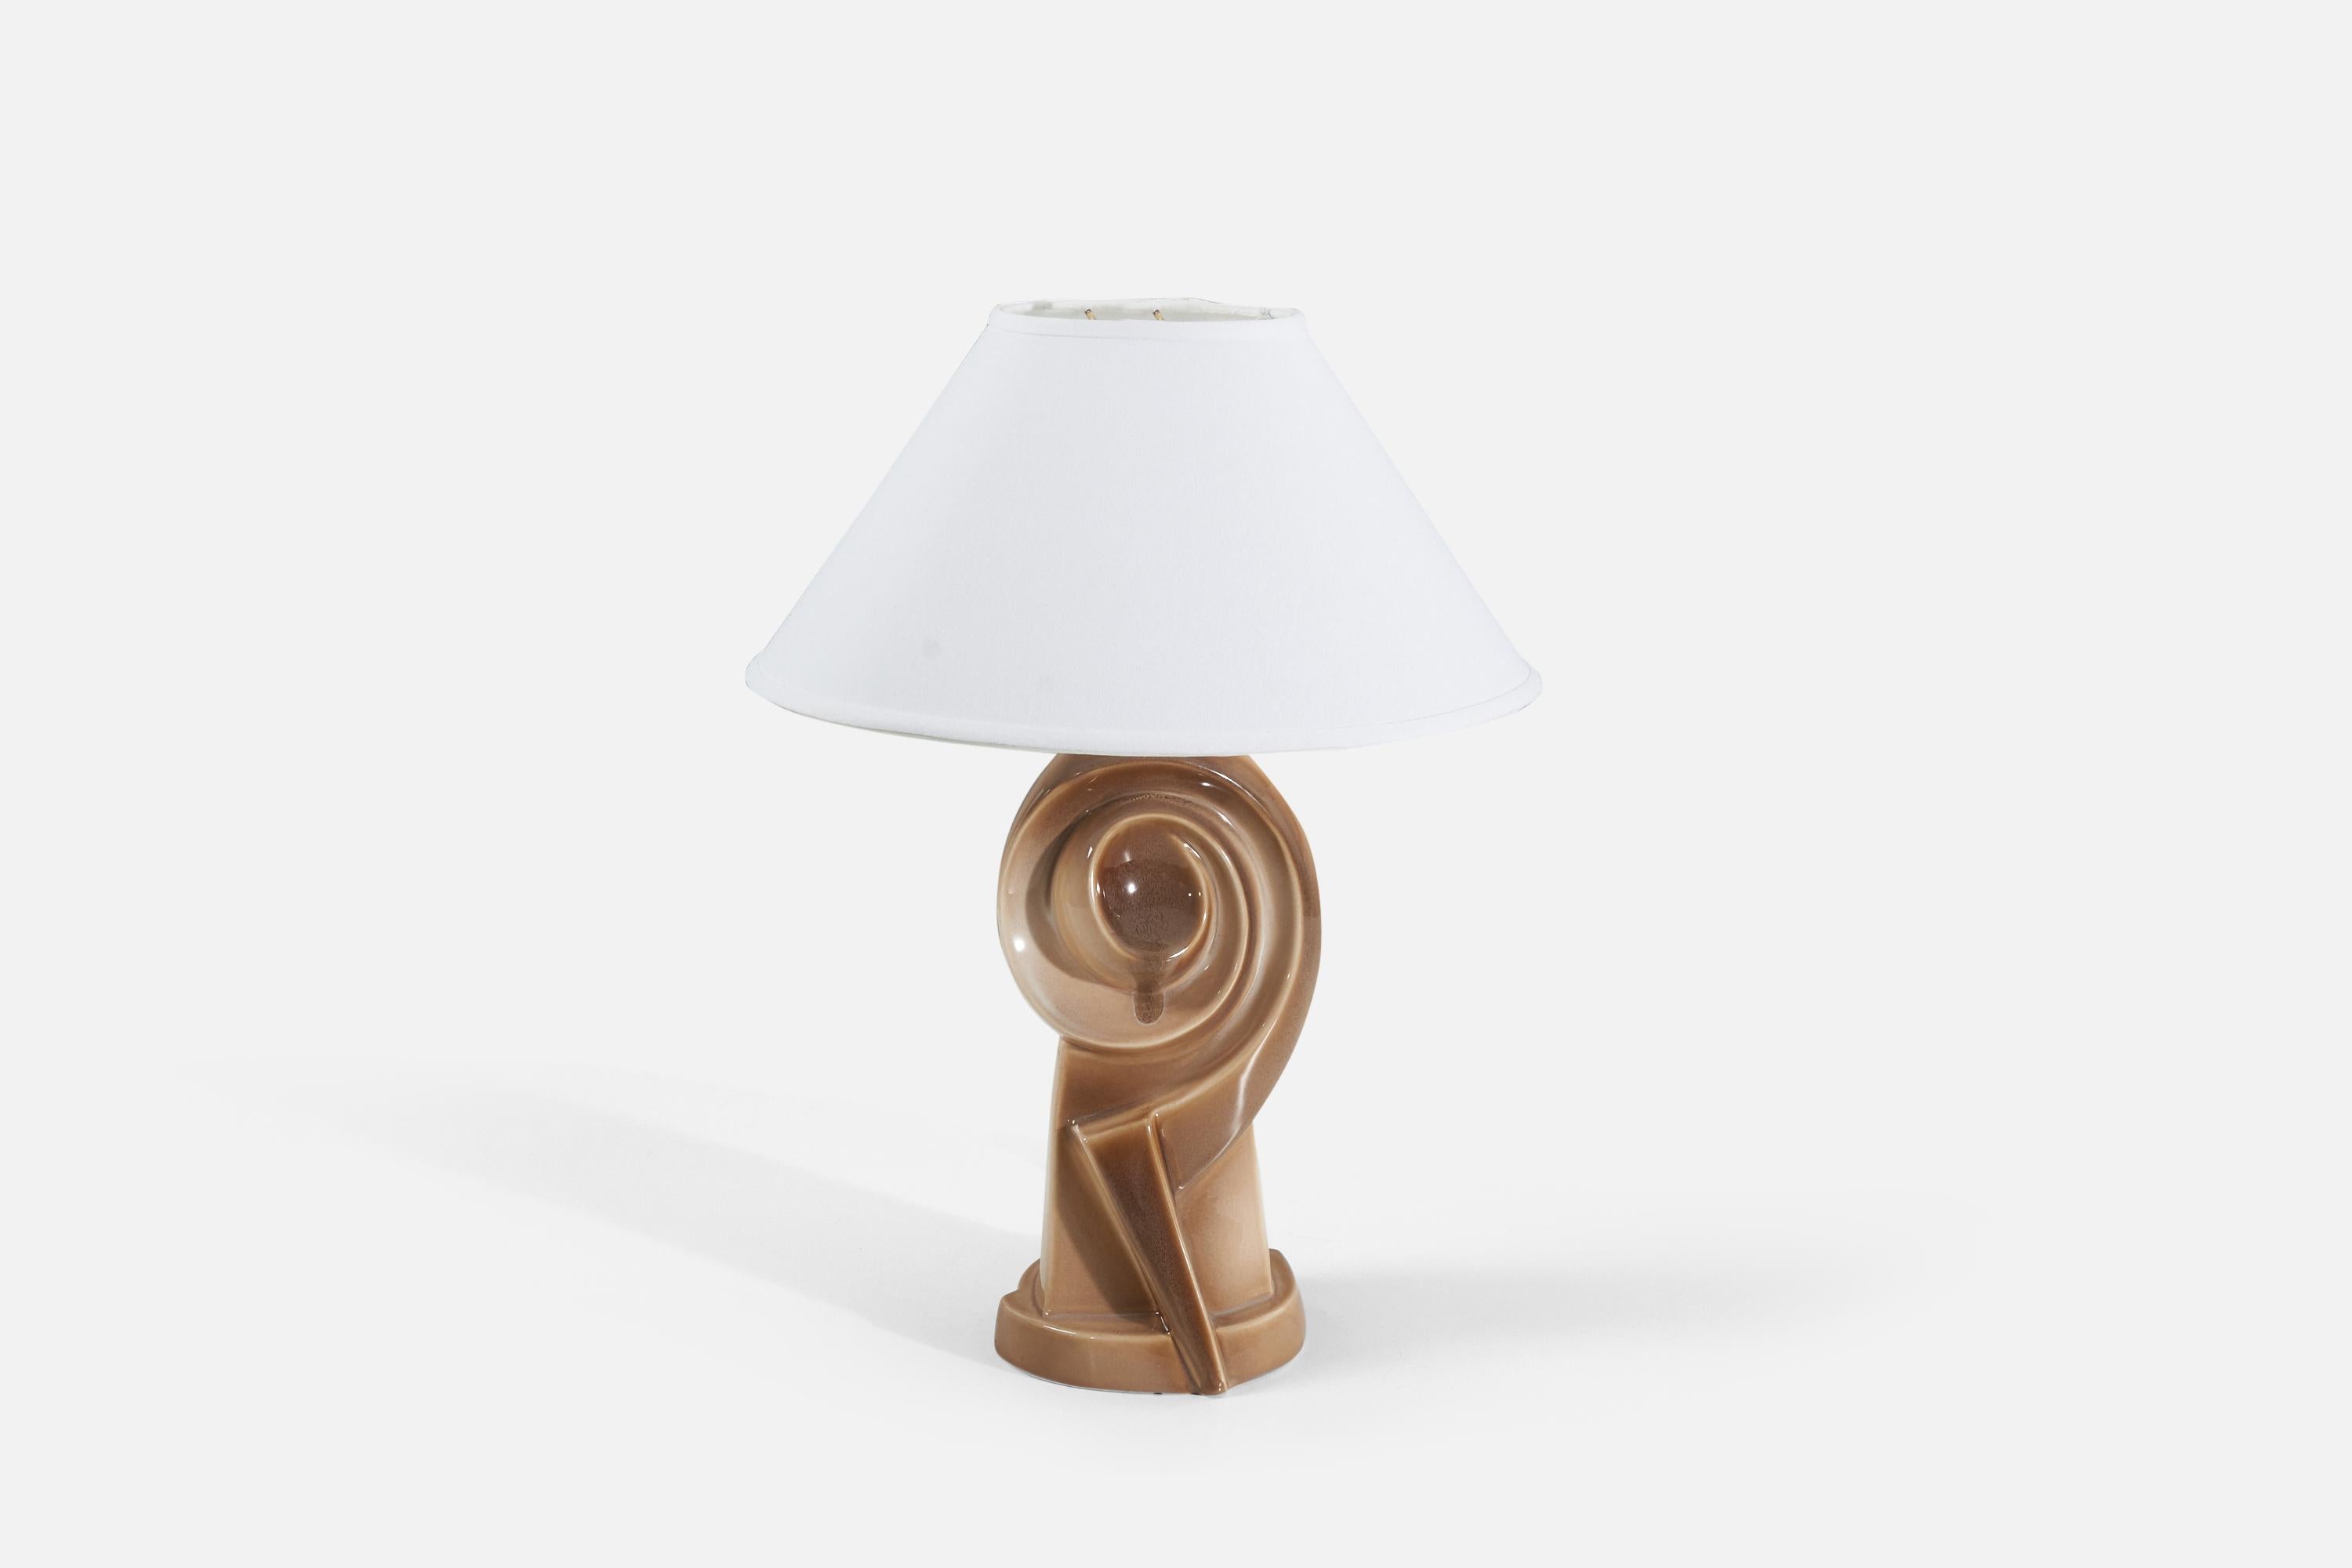 A brown- glazed ceramic and brass table lamp produced by an American designer, United States, 1960s.

Sold without lampshade

Measurements listed are of lamp.
Shade : 6 x 16 x 9.25
Lamp with shade : 23 x 16 x 16.